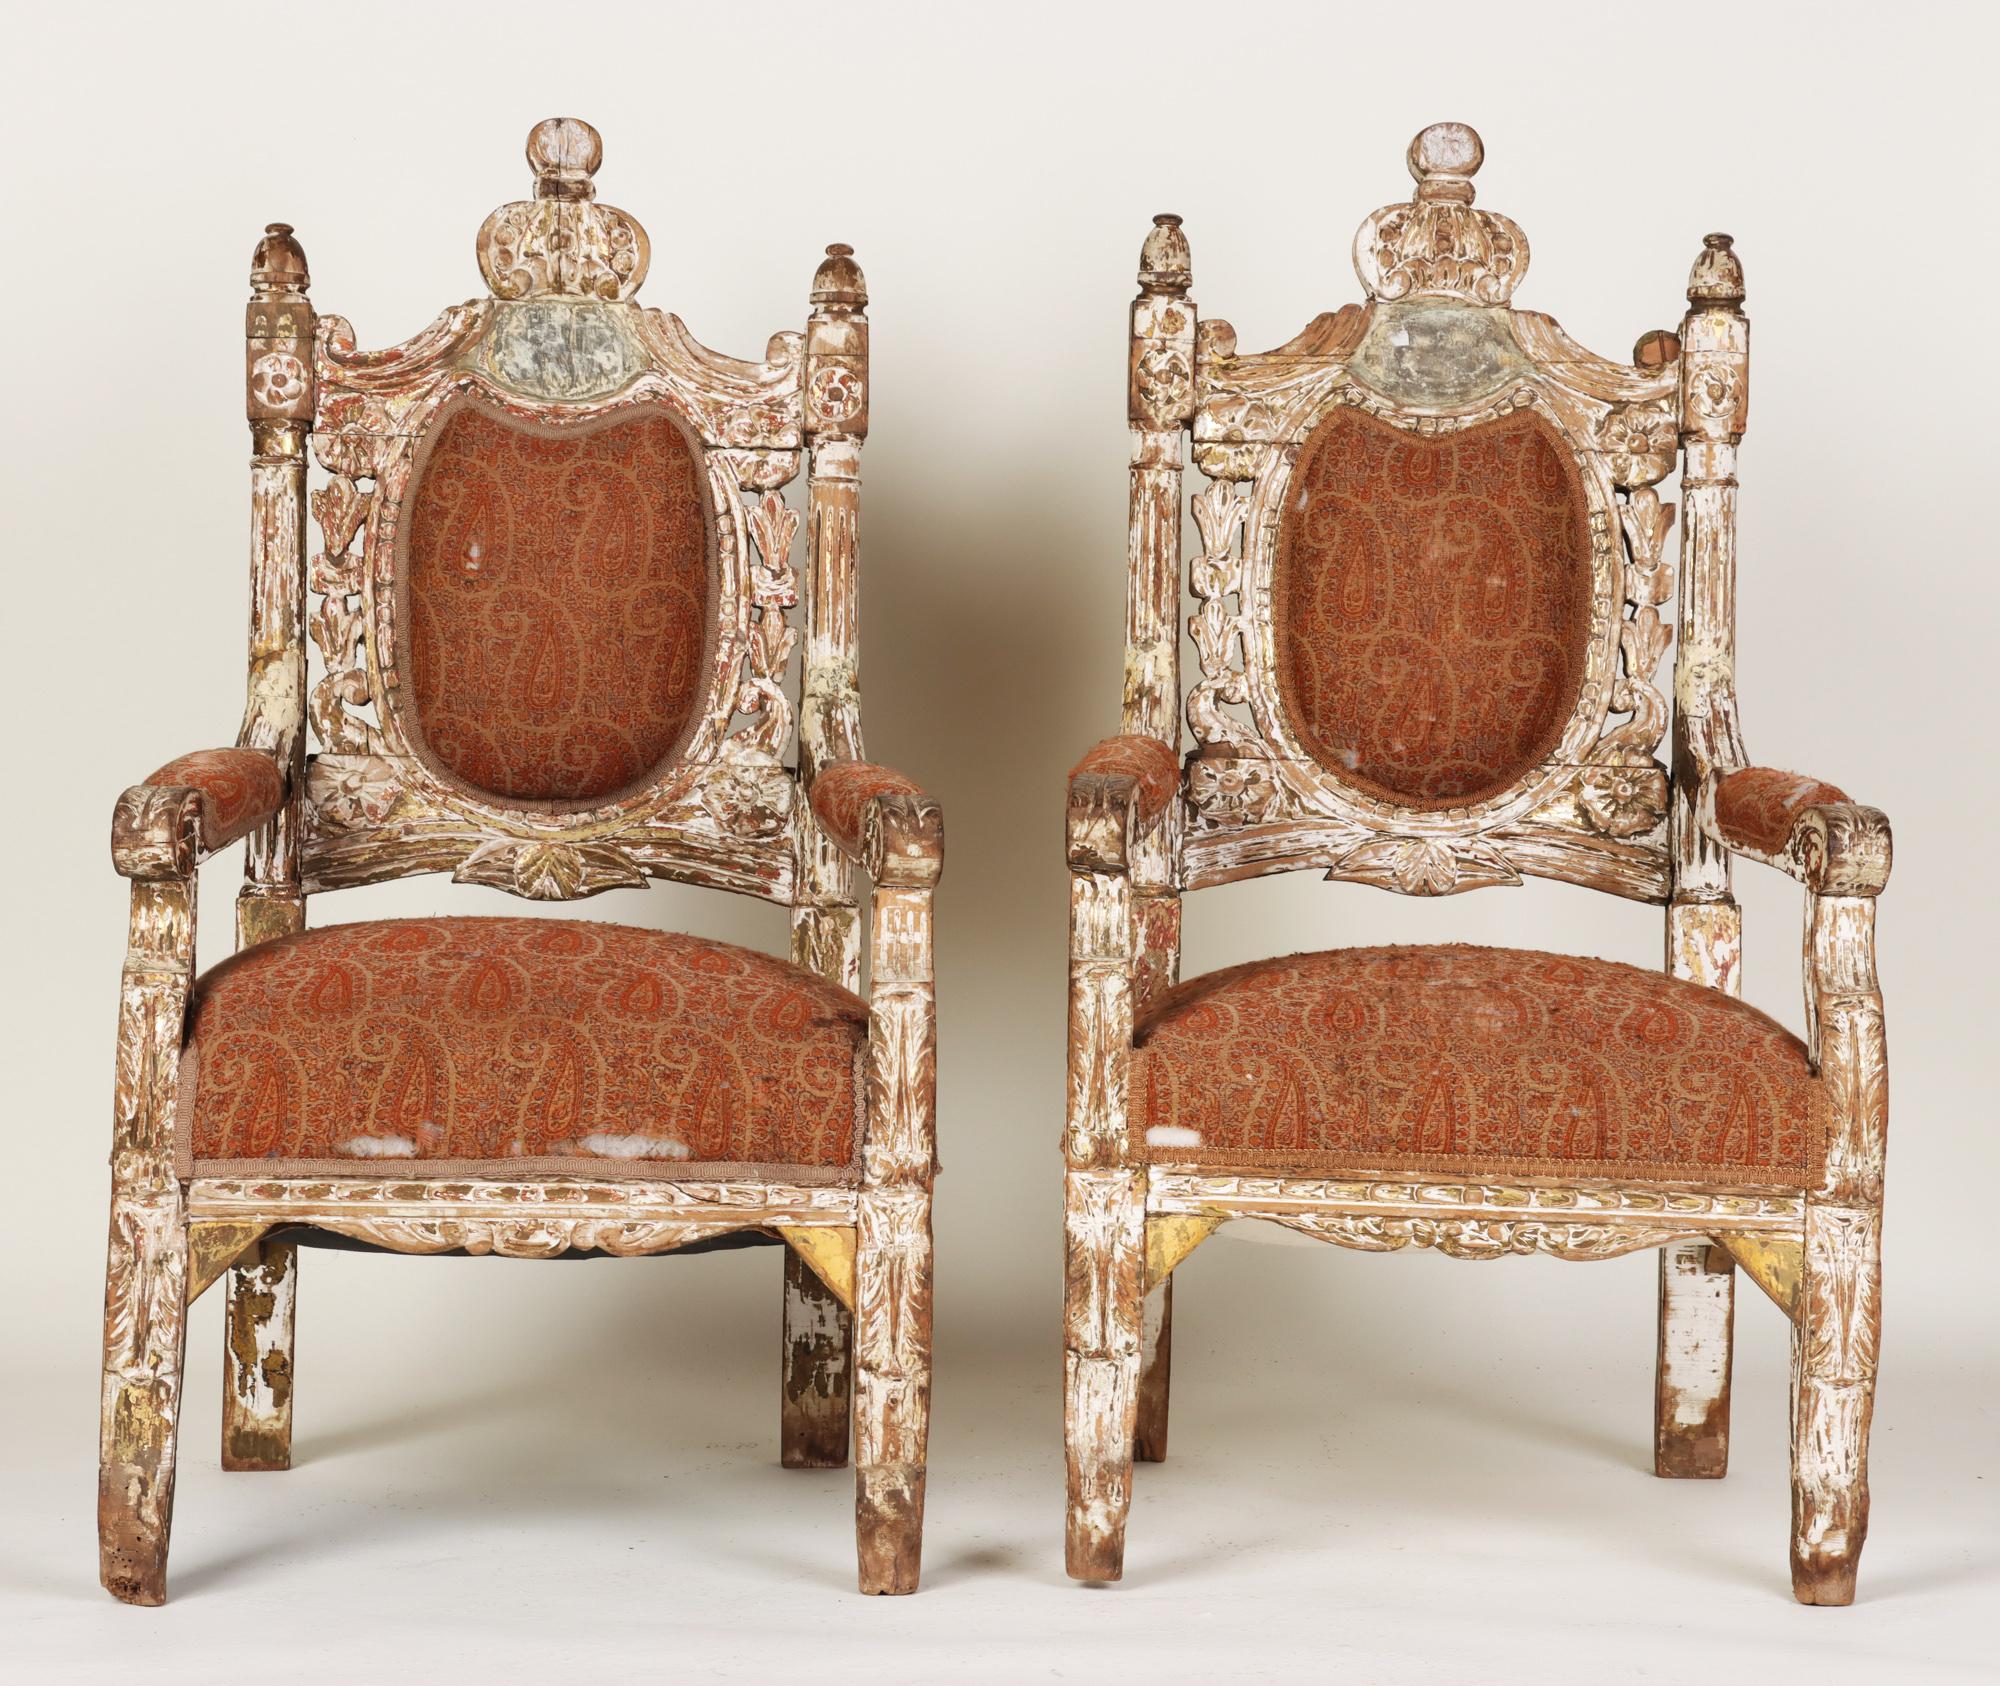 A pair of monumental Italian throne style carved armchairs. Early 19th C. Gilding mixed with a natural cerused oak look give these chairs a beautiful patina. Having original horsehair upholstery still intact.